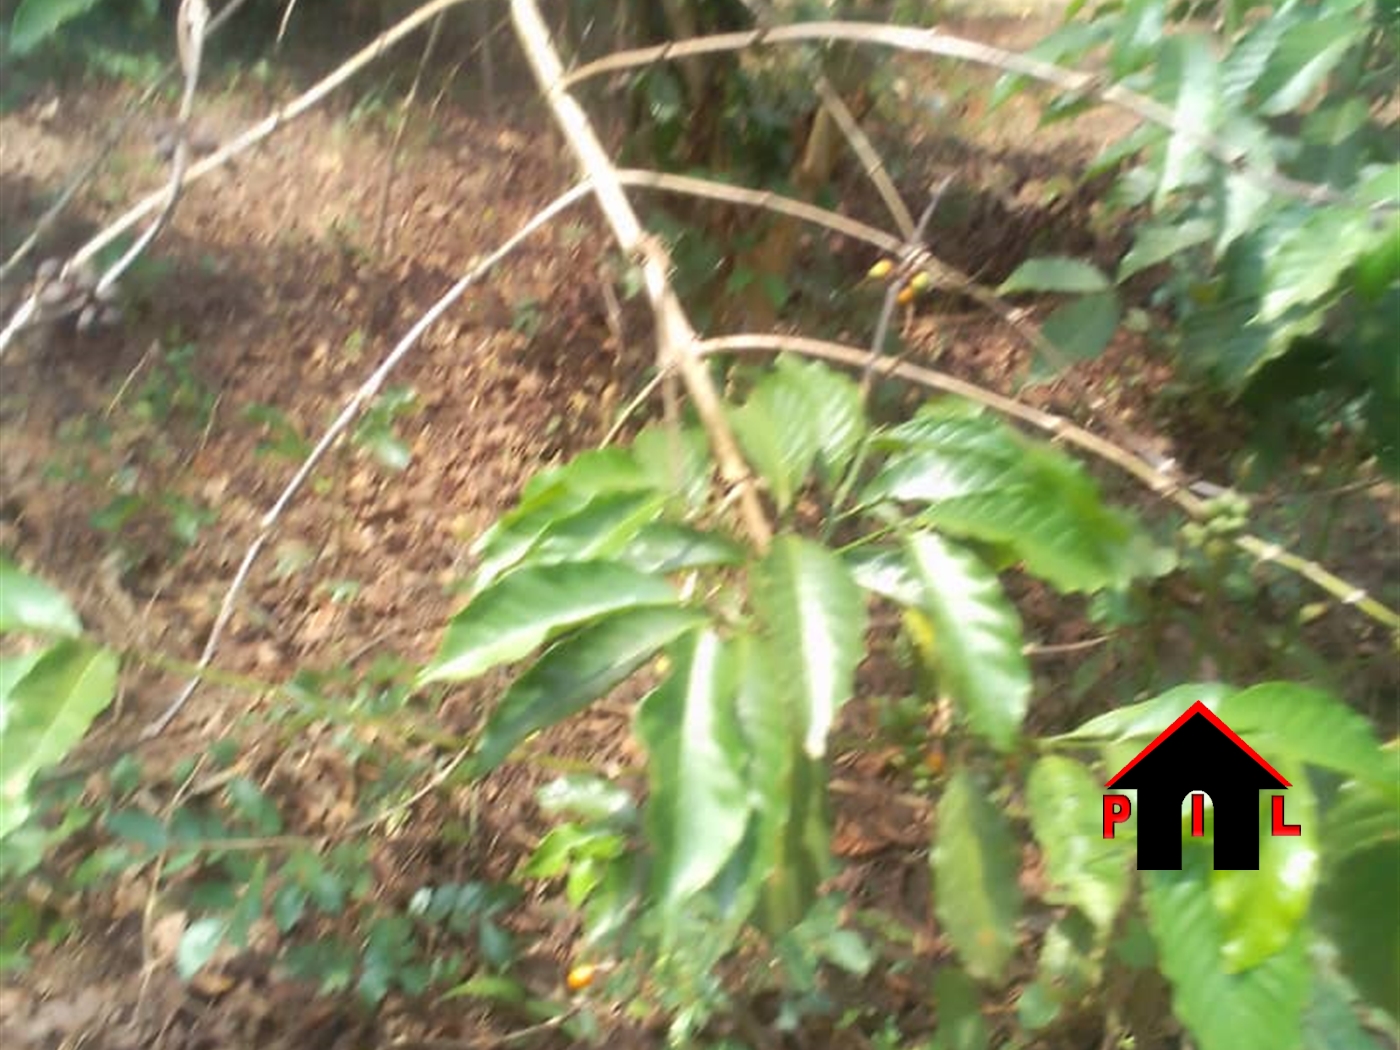 Agricultural Land for sale in Kayonza Luweero